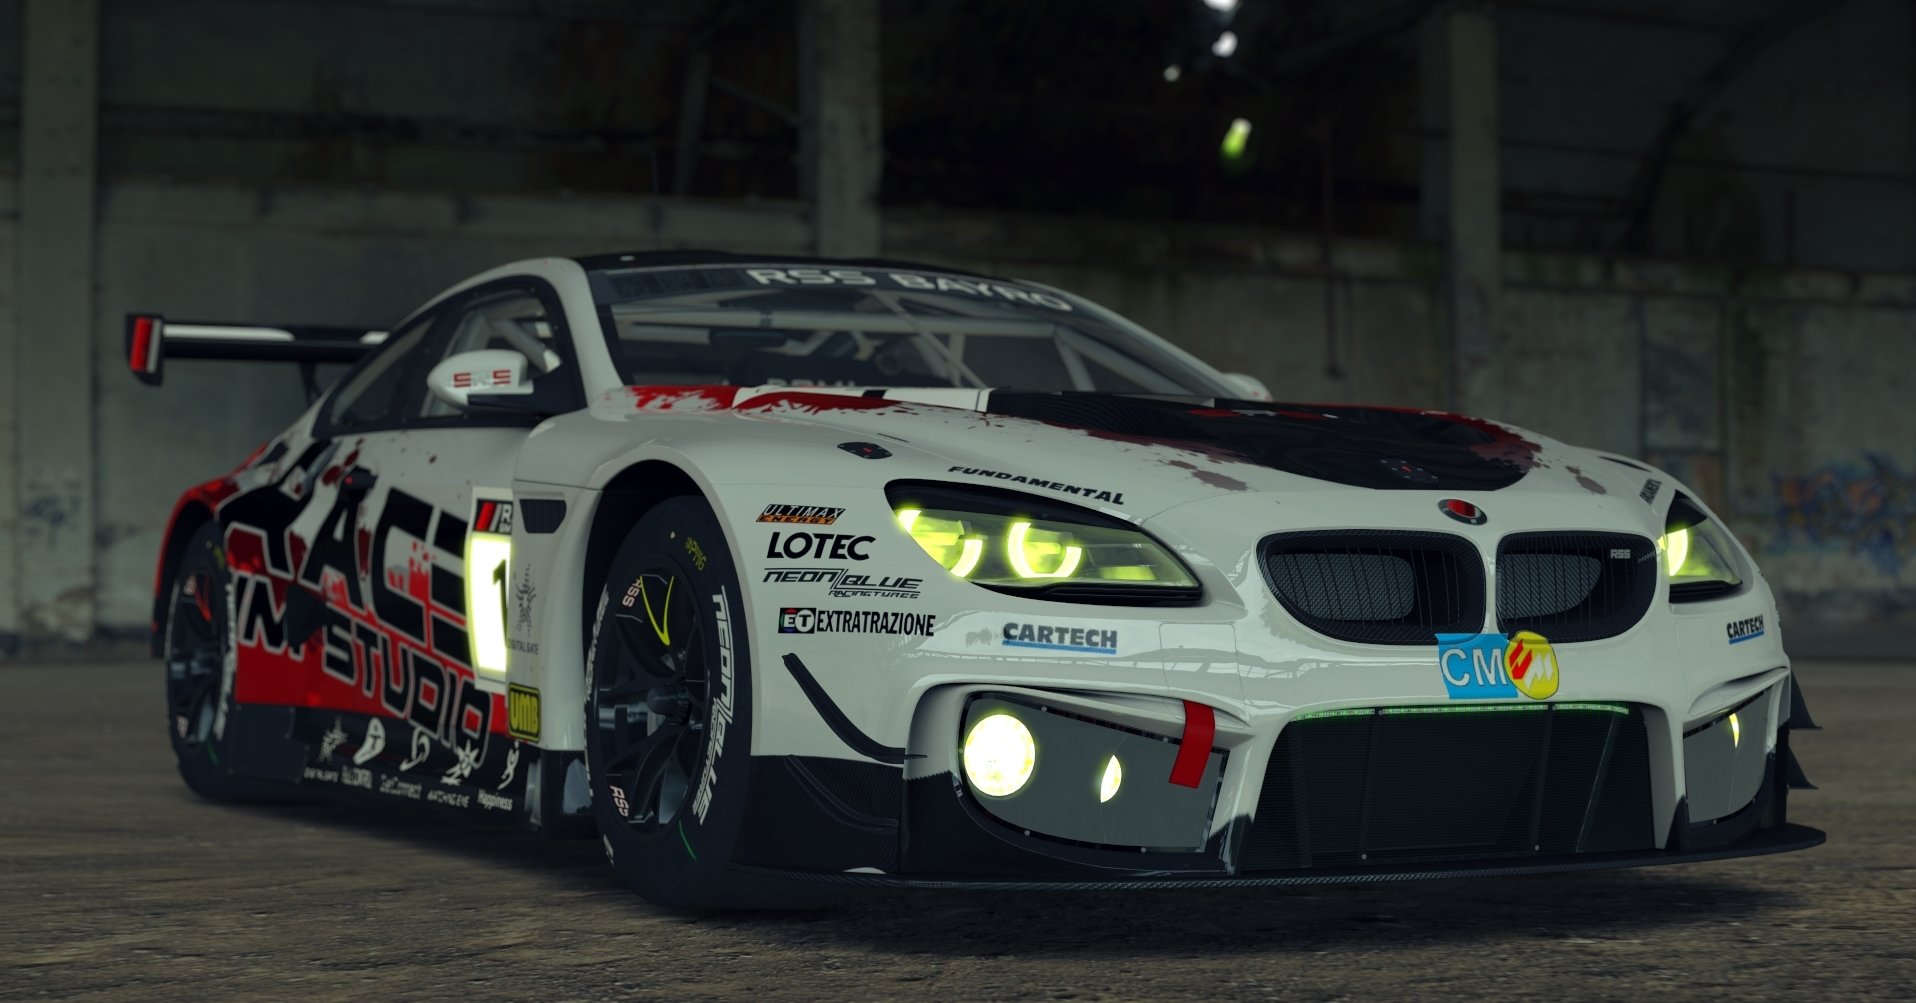 More information about "Assetto Corsa: GTM Bayro V8 by Race Sim Studio disponibile!"